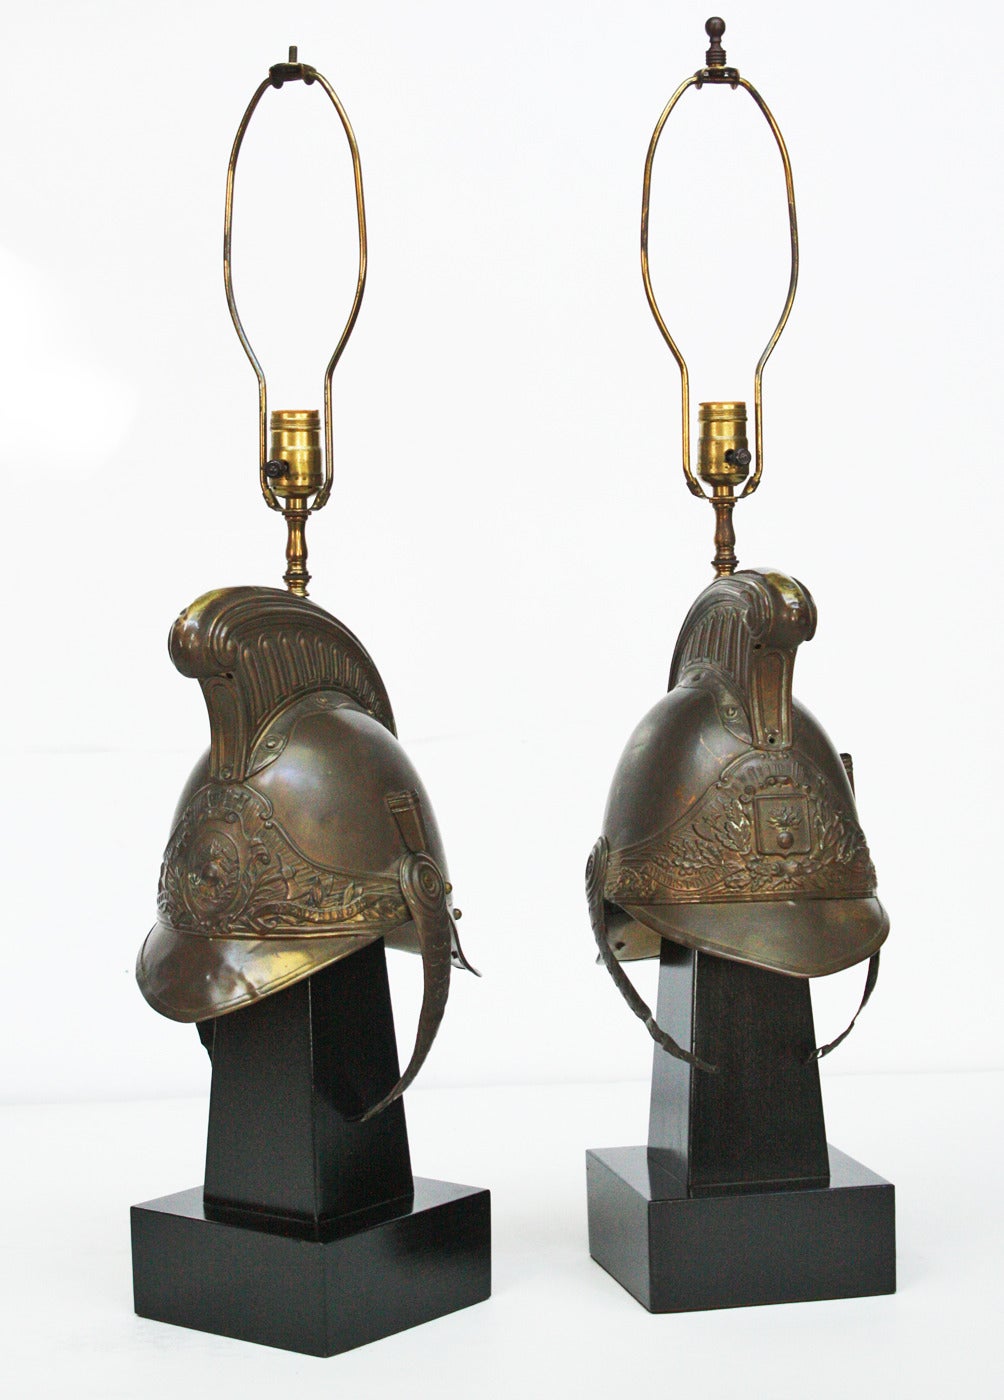 pair of lamps, two brass helmets, French firefighter / fireman, mounted as custom lamps on black block form bases, sans shades

Black form bases are: 6.5